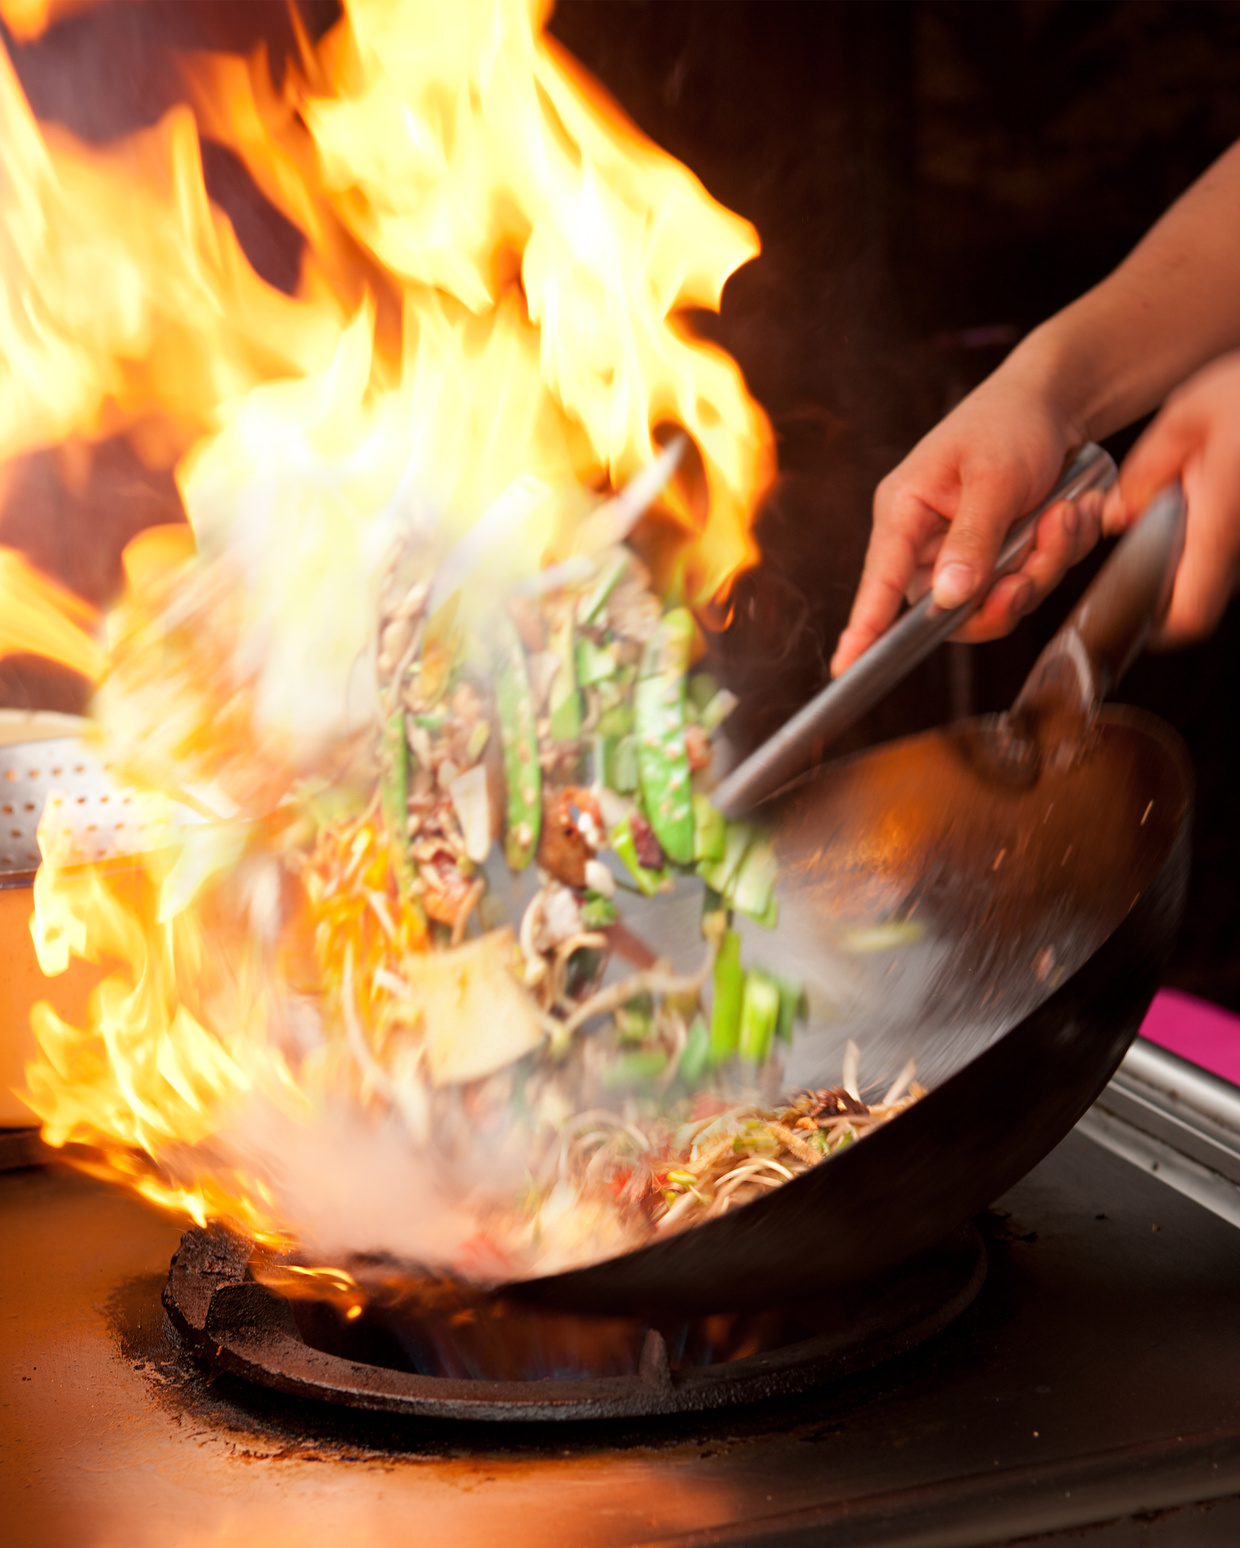 Wok frying with flames